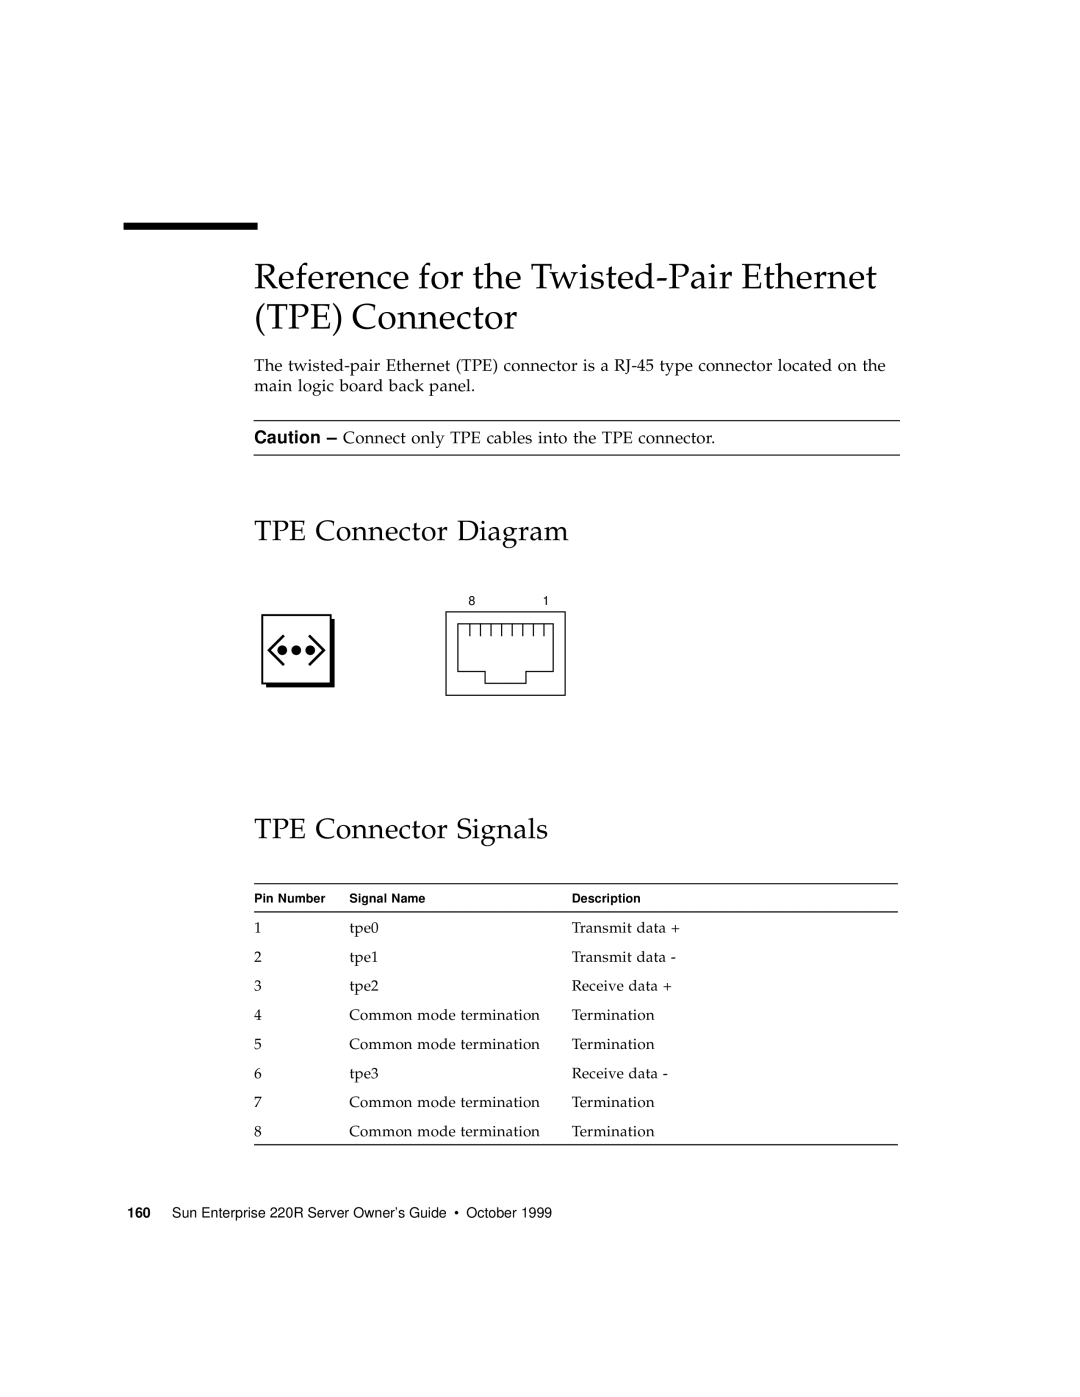 Sun Microsystems 220R Reference for the Twisted-Pair Ethernet TPE Connector, TPE Connector Diagram, TPE Connector Signals 